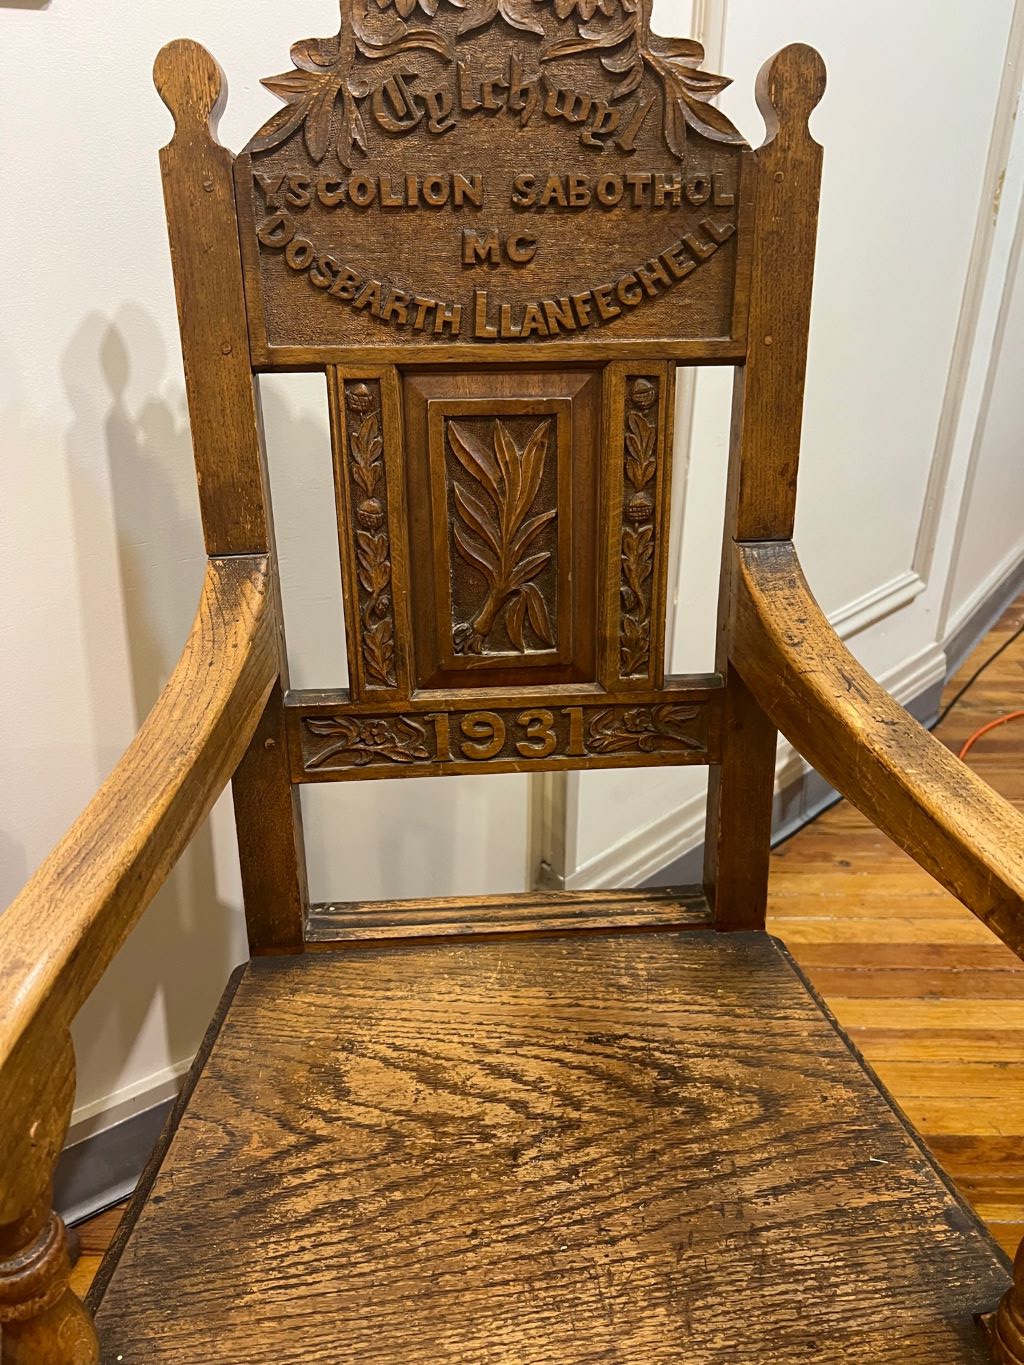 A wooden chair with carvings of leaves and flowers and words in Welsh.